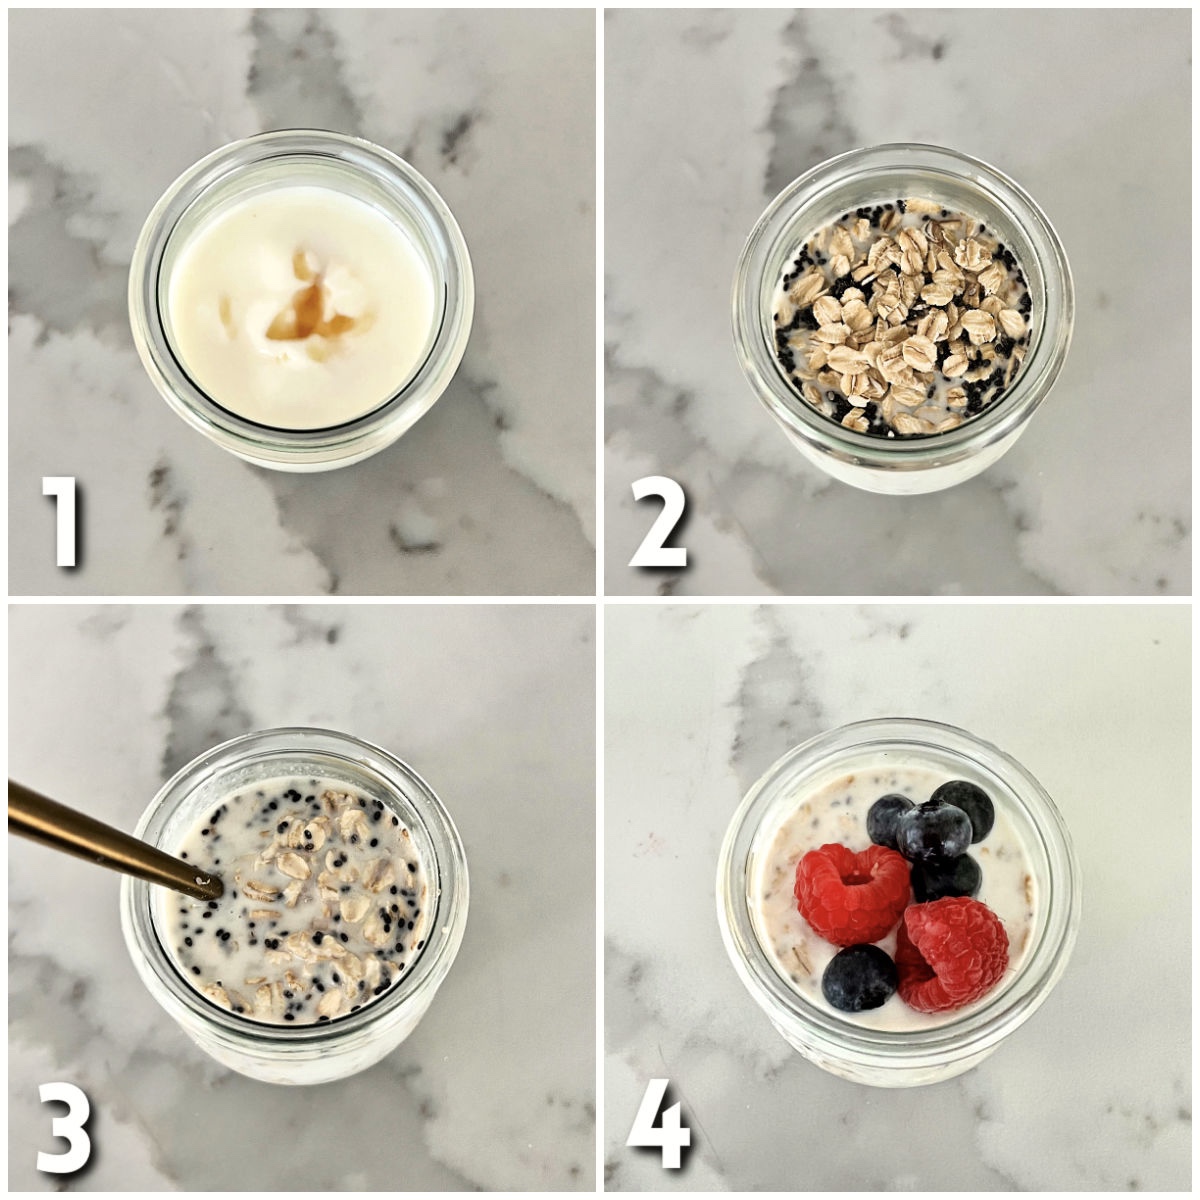 Steps for making healthy overnight oats.